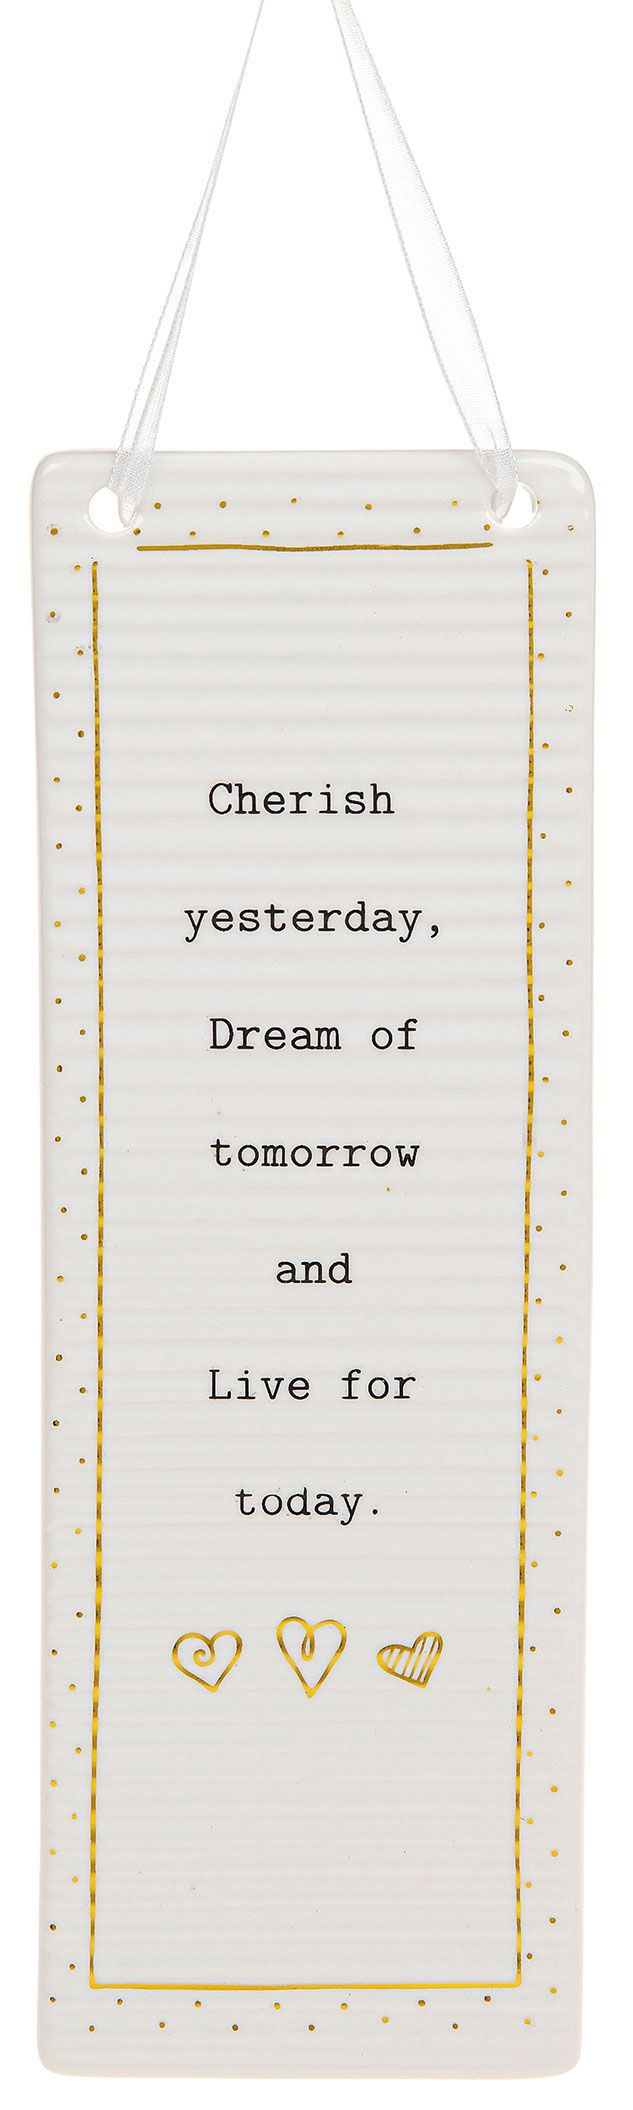 Cherish yesterday dream of tomorrow and live for today. Rectangle hanging plaque.